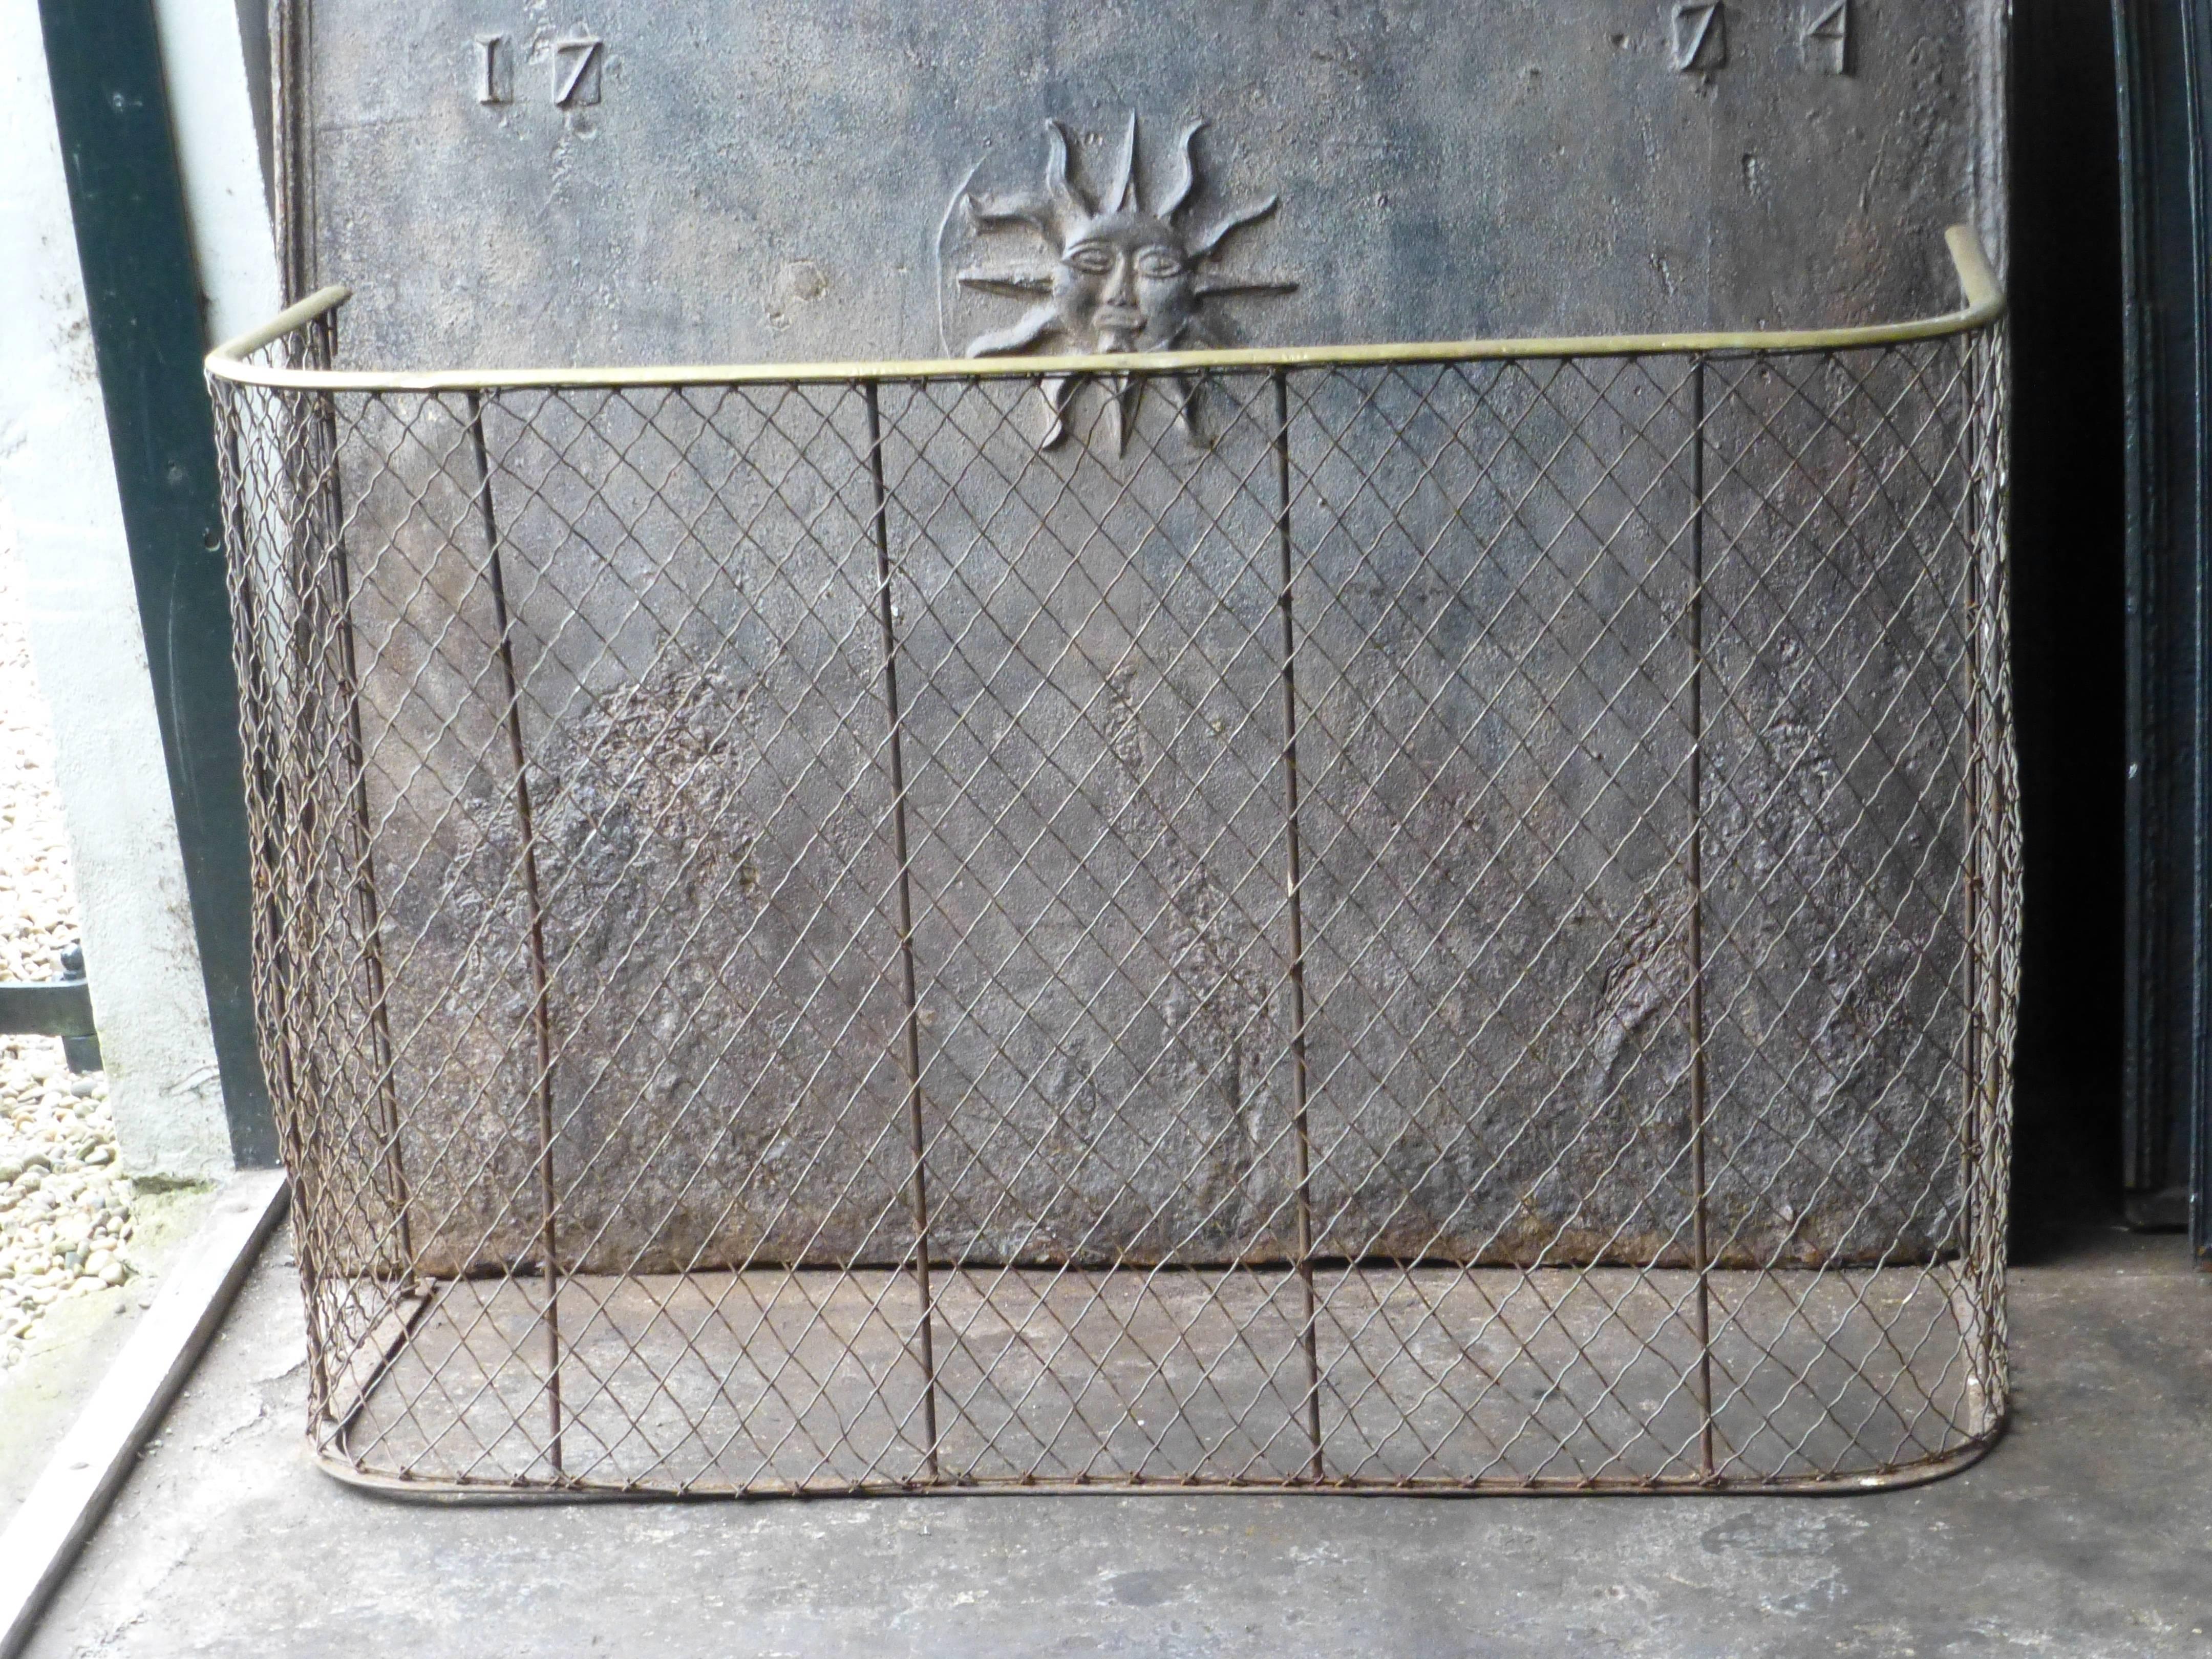 19th century English brass and iron fire guard.

We have a unique and specialized collection of antique and used fireplace accessories consisting of more than 1000 listings at 1stdibs. Amongst others we always have 300+ firebacks, 250+ pairs of